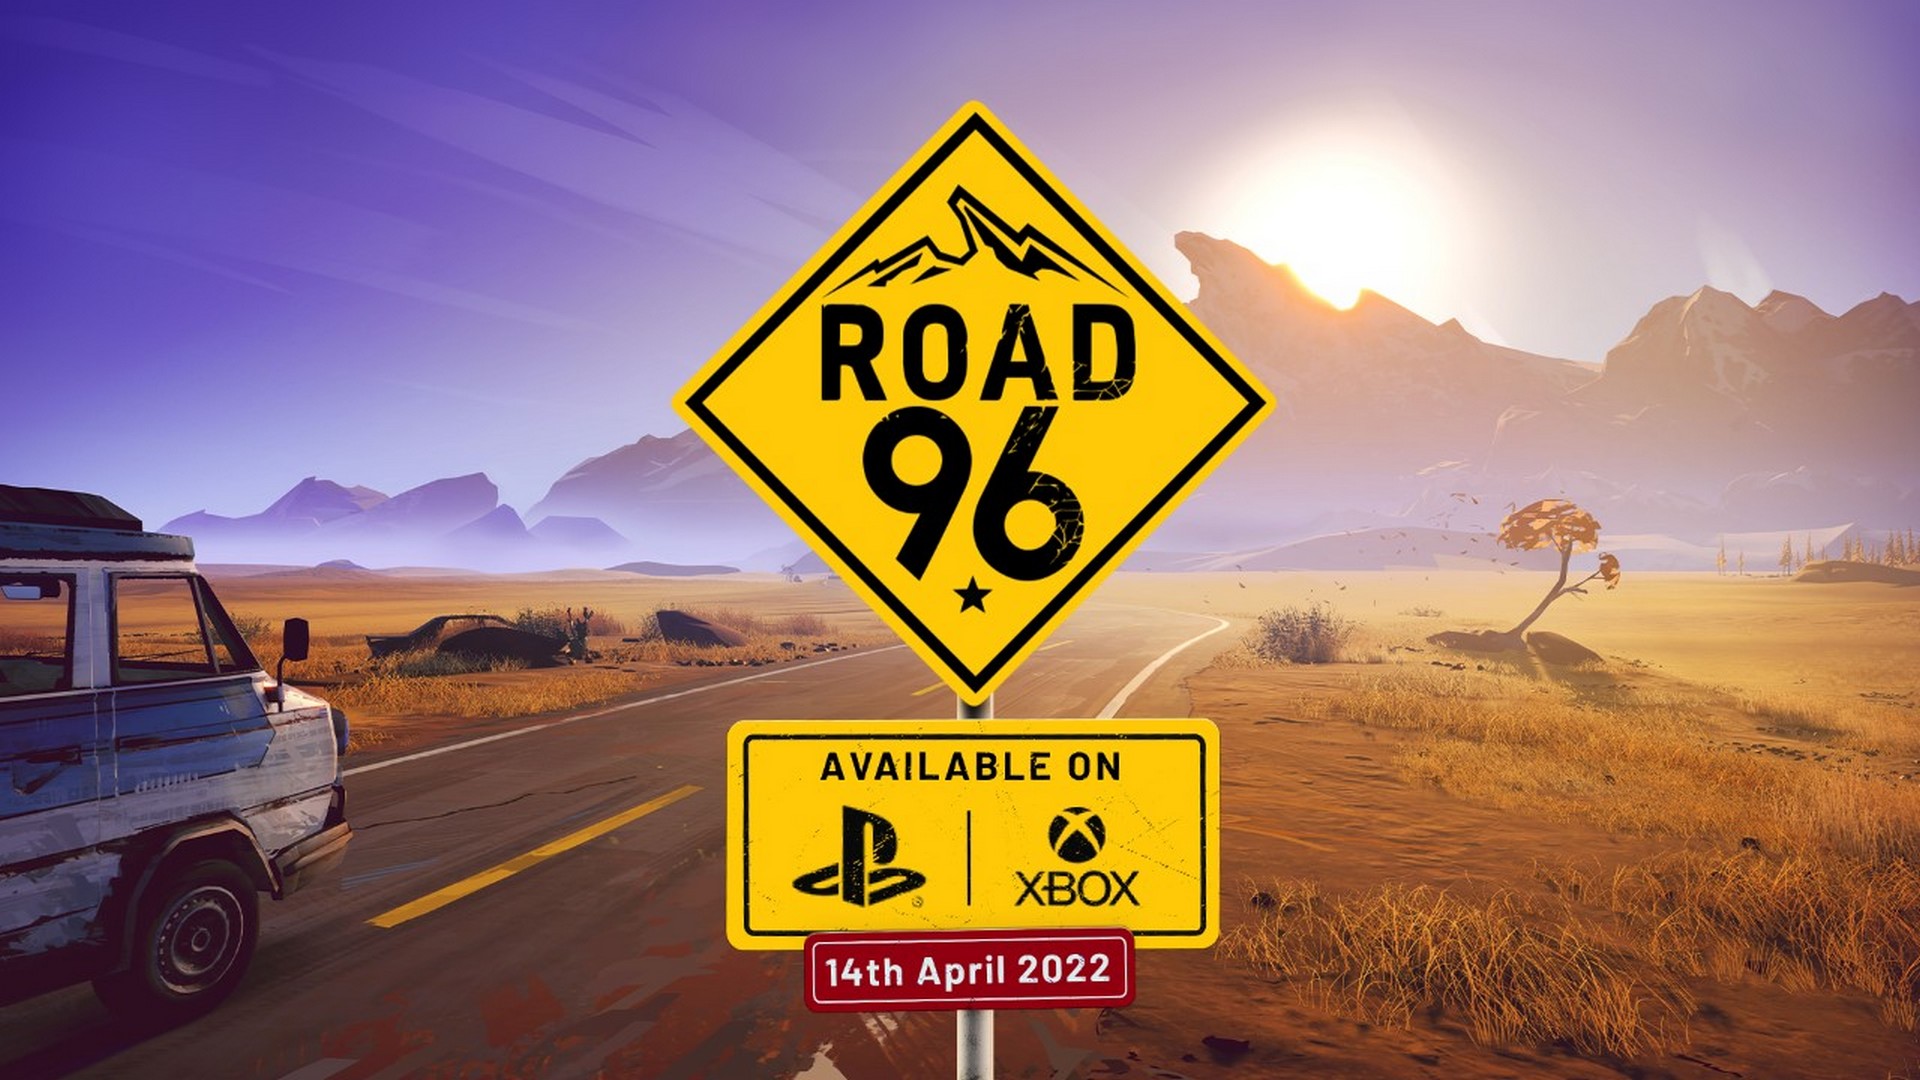 Road 96: Console Players Can Hit The Road On 14 April